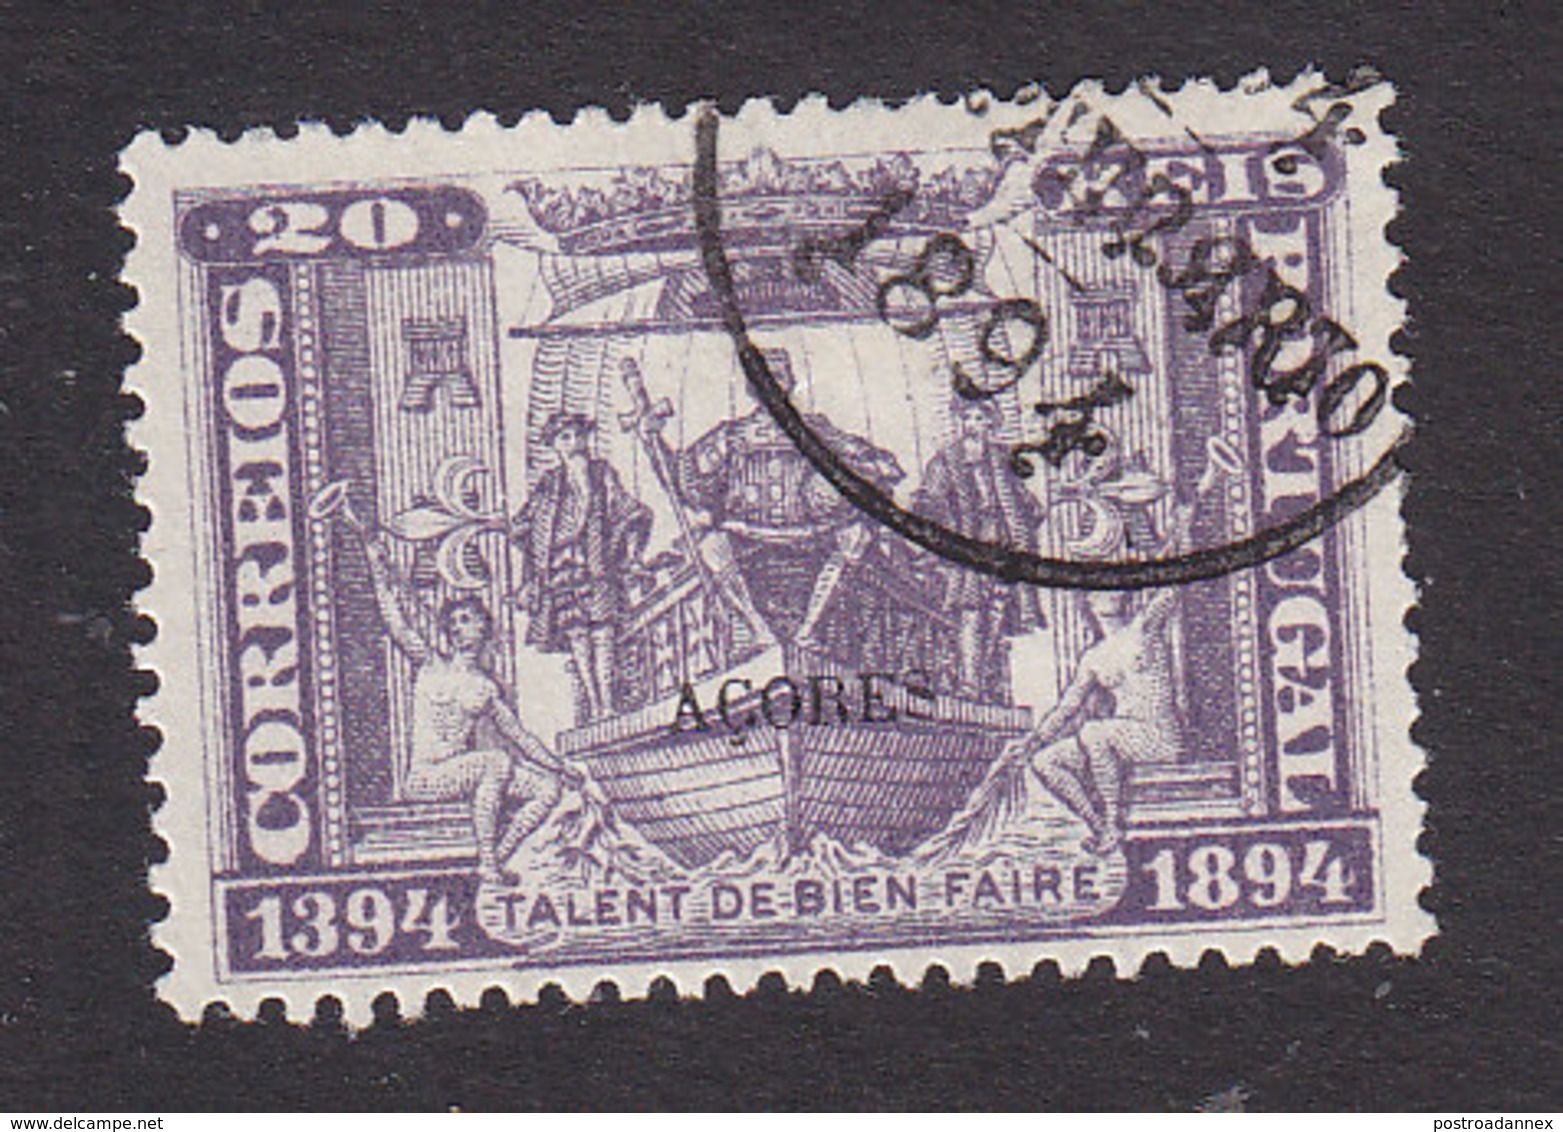 Azores, Scott #68, Used, Prince Henry On His Ship Overprinted, Issued 1894 - Azores